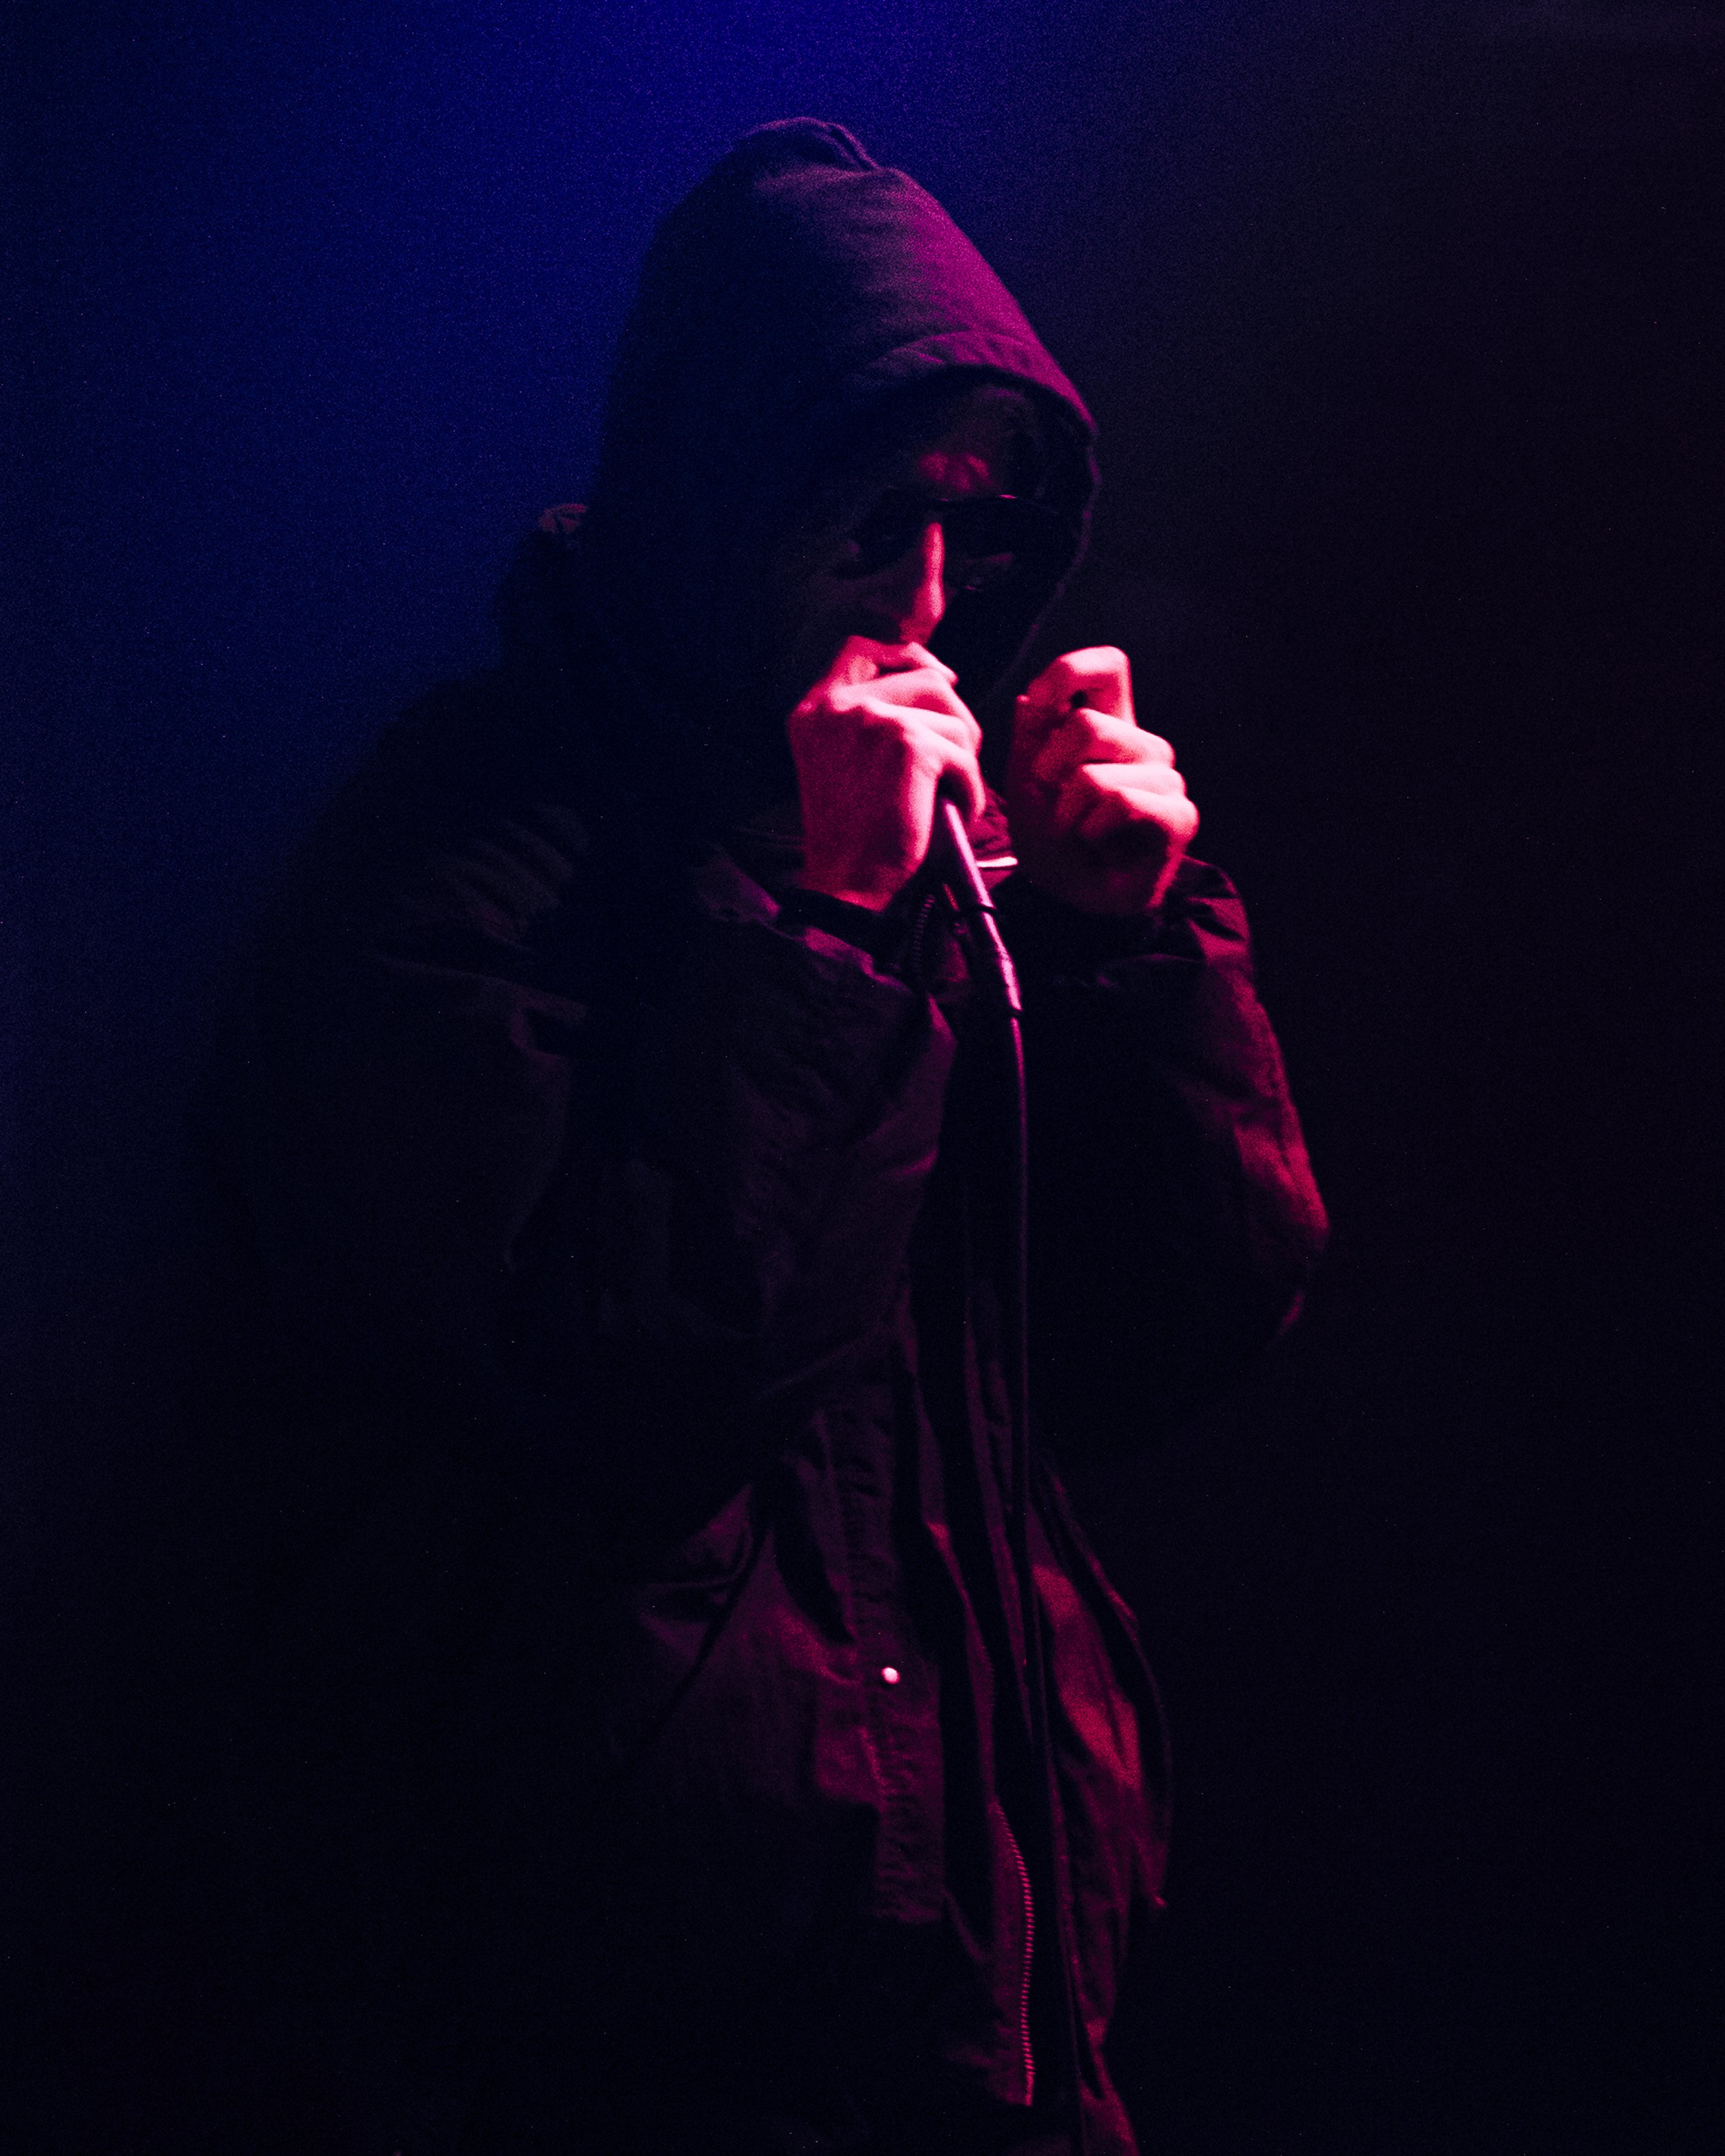 Wicca Phase Springs Eternal -  WINTER TOUR 2022 - The Bluebird Theater - Denver, Colorado - Friday, December 16, 2022- PHOTO BY Mowgli Miles of Interracial Friends - PHOTO BY Mowgli Miles of Interracial Friends-19.JPG